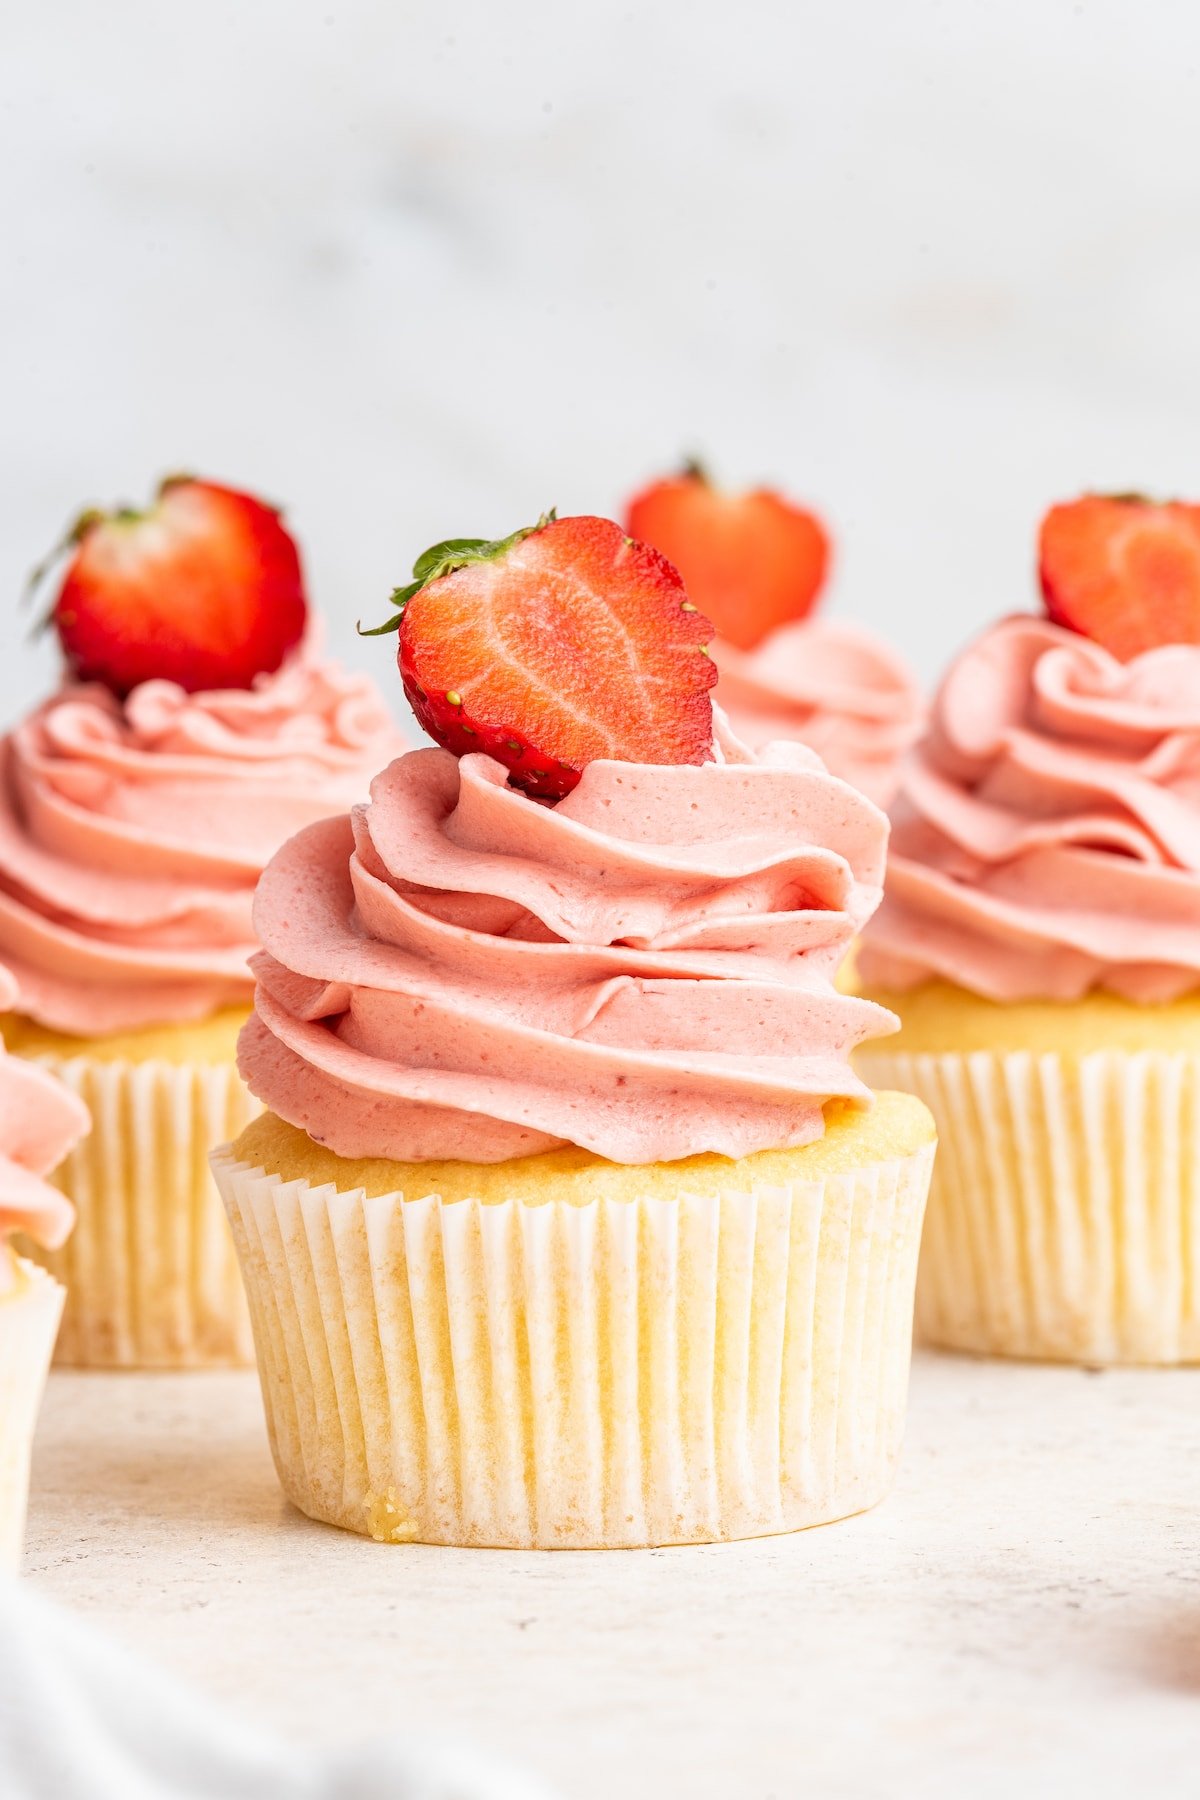 A cupcake standing center, with others in the background. The cupcakes are topped with a pink frosting and fresh strawberry slices on top.